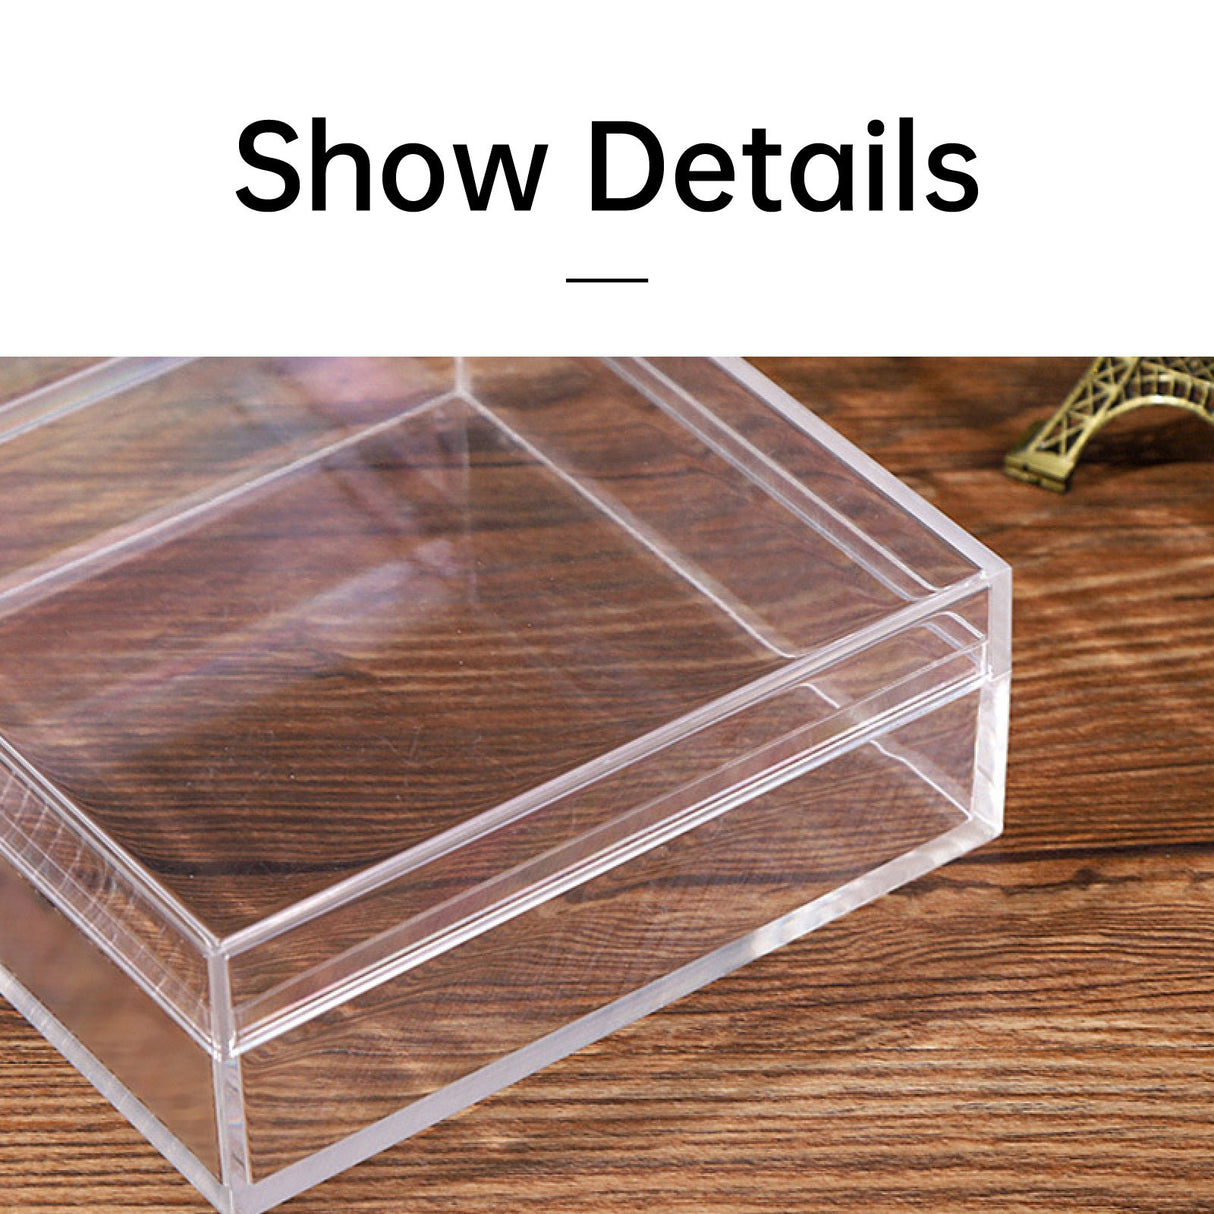 Elegant Storage with Acrylic Plastic Boxes - Perfect for Events